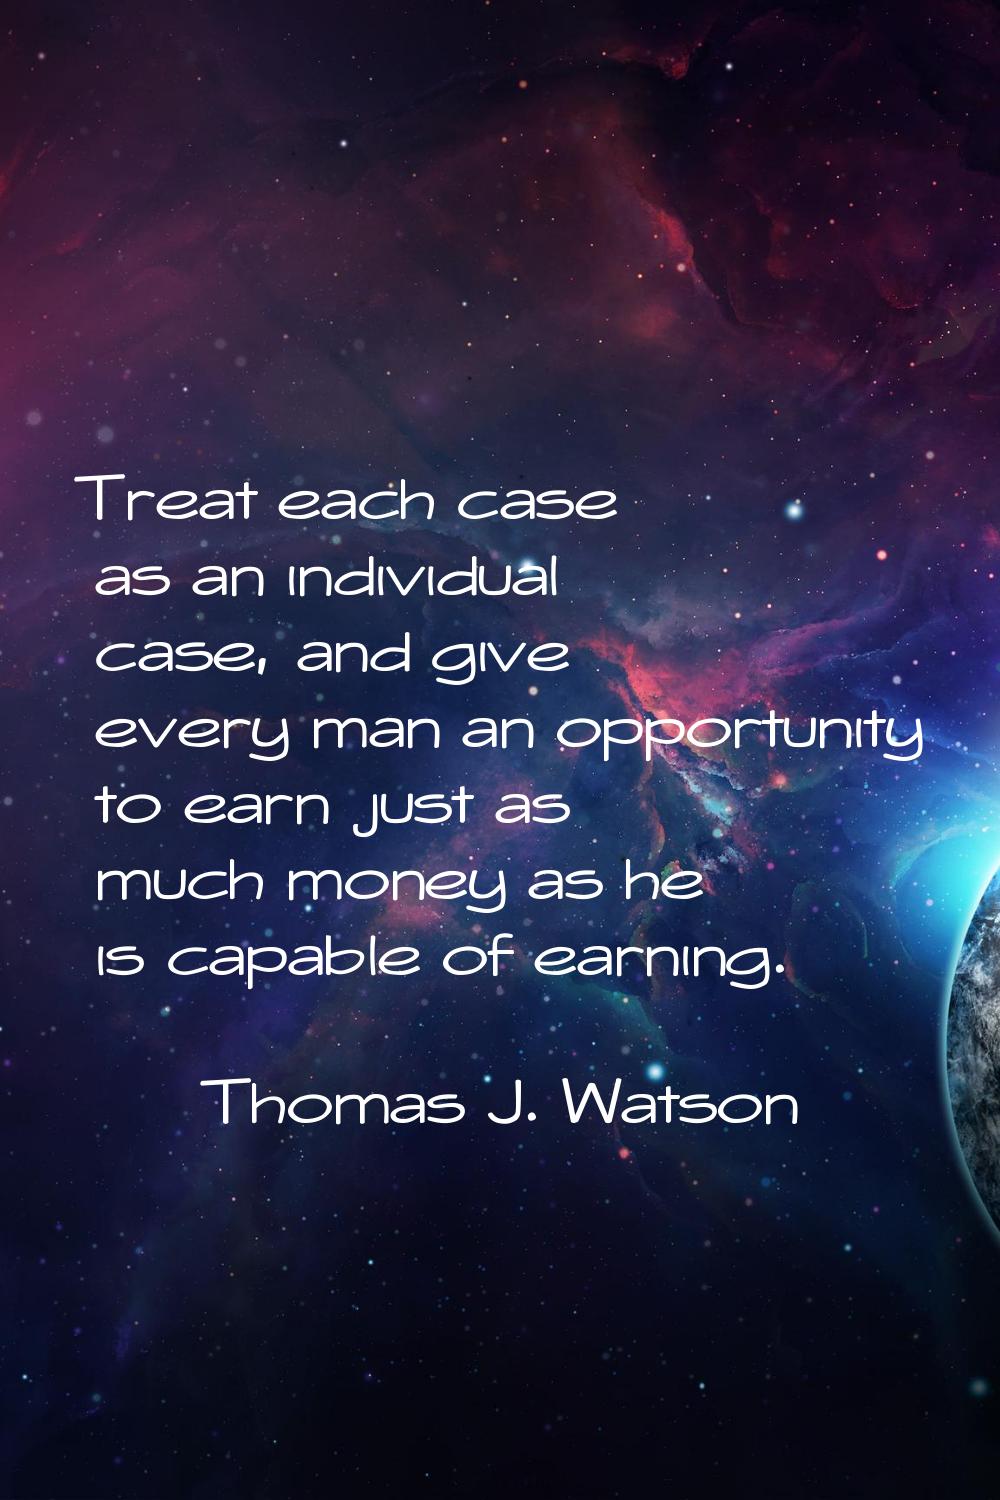 Treat each case as an individual case, and give every man an opportunity to earn just as much money